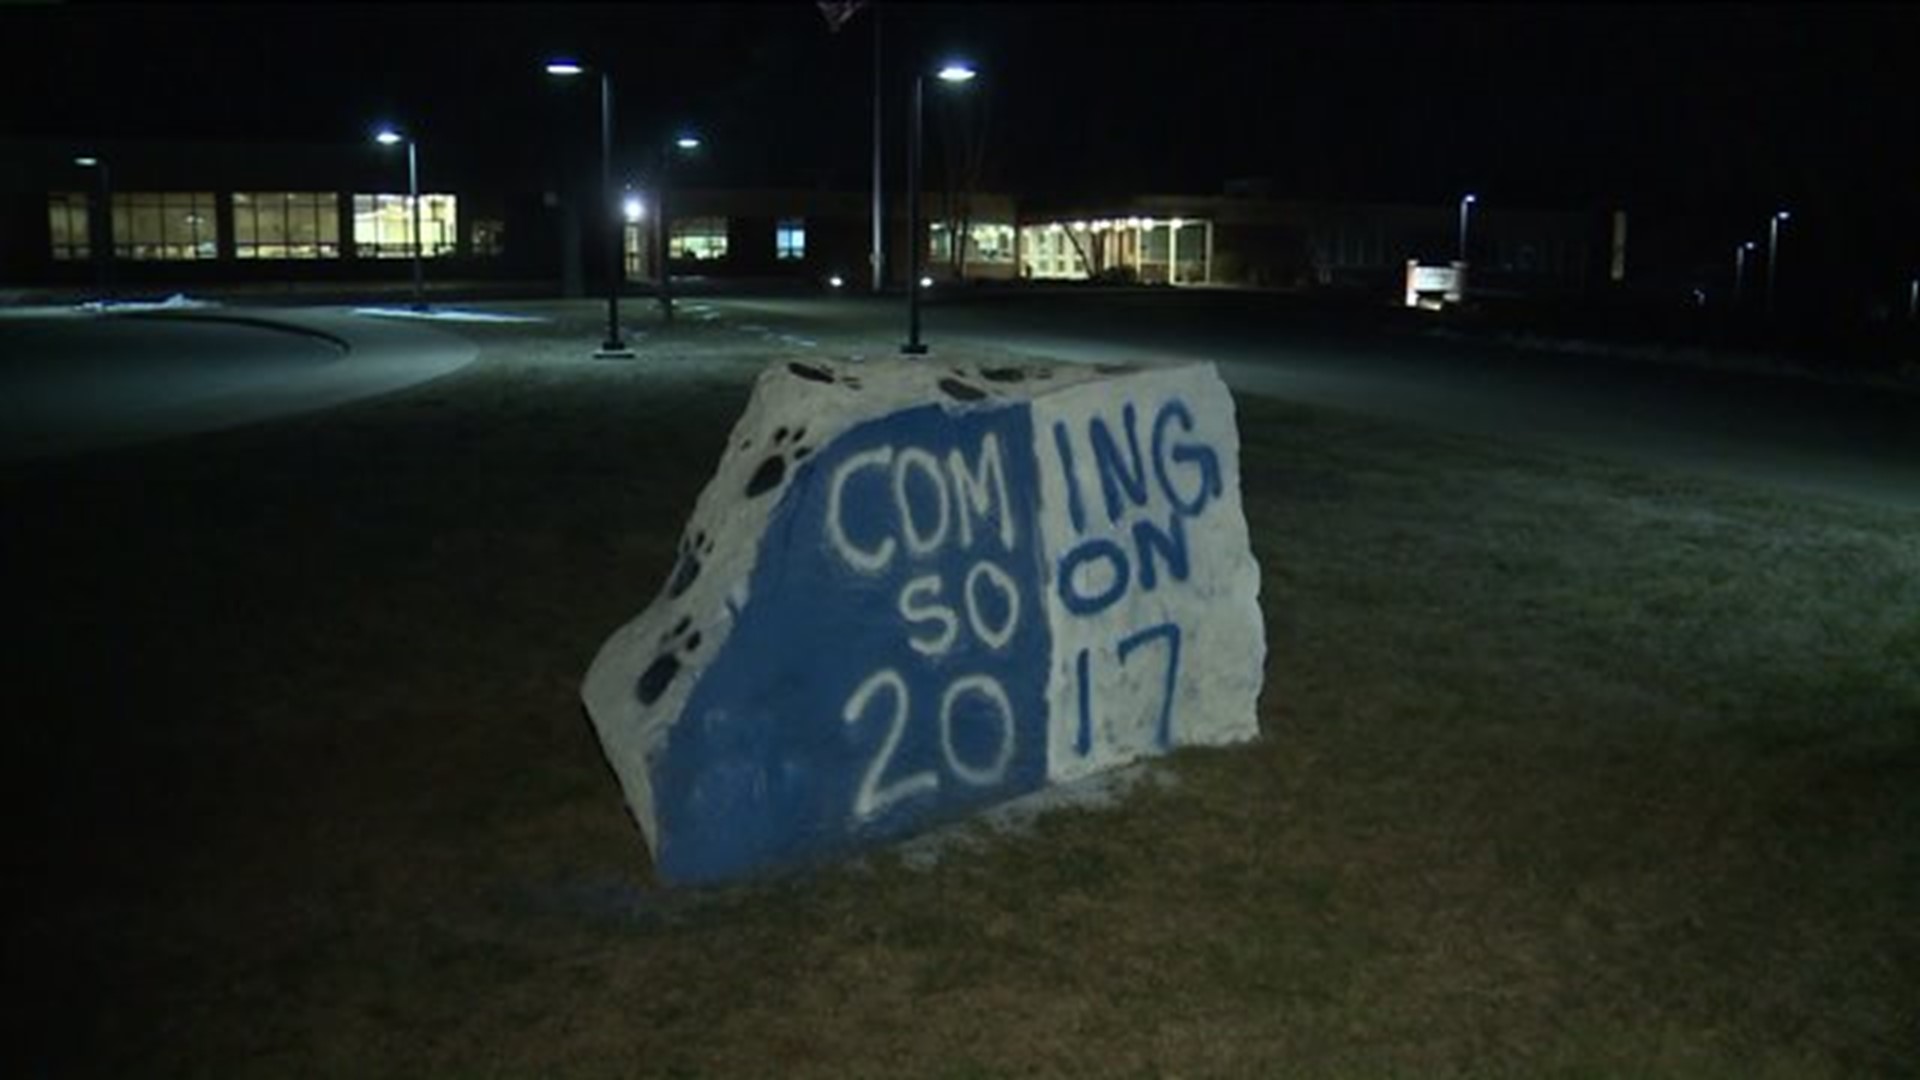 Residents upset over Stafford graduation gown changes